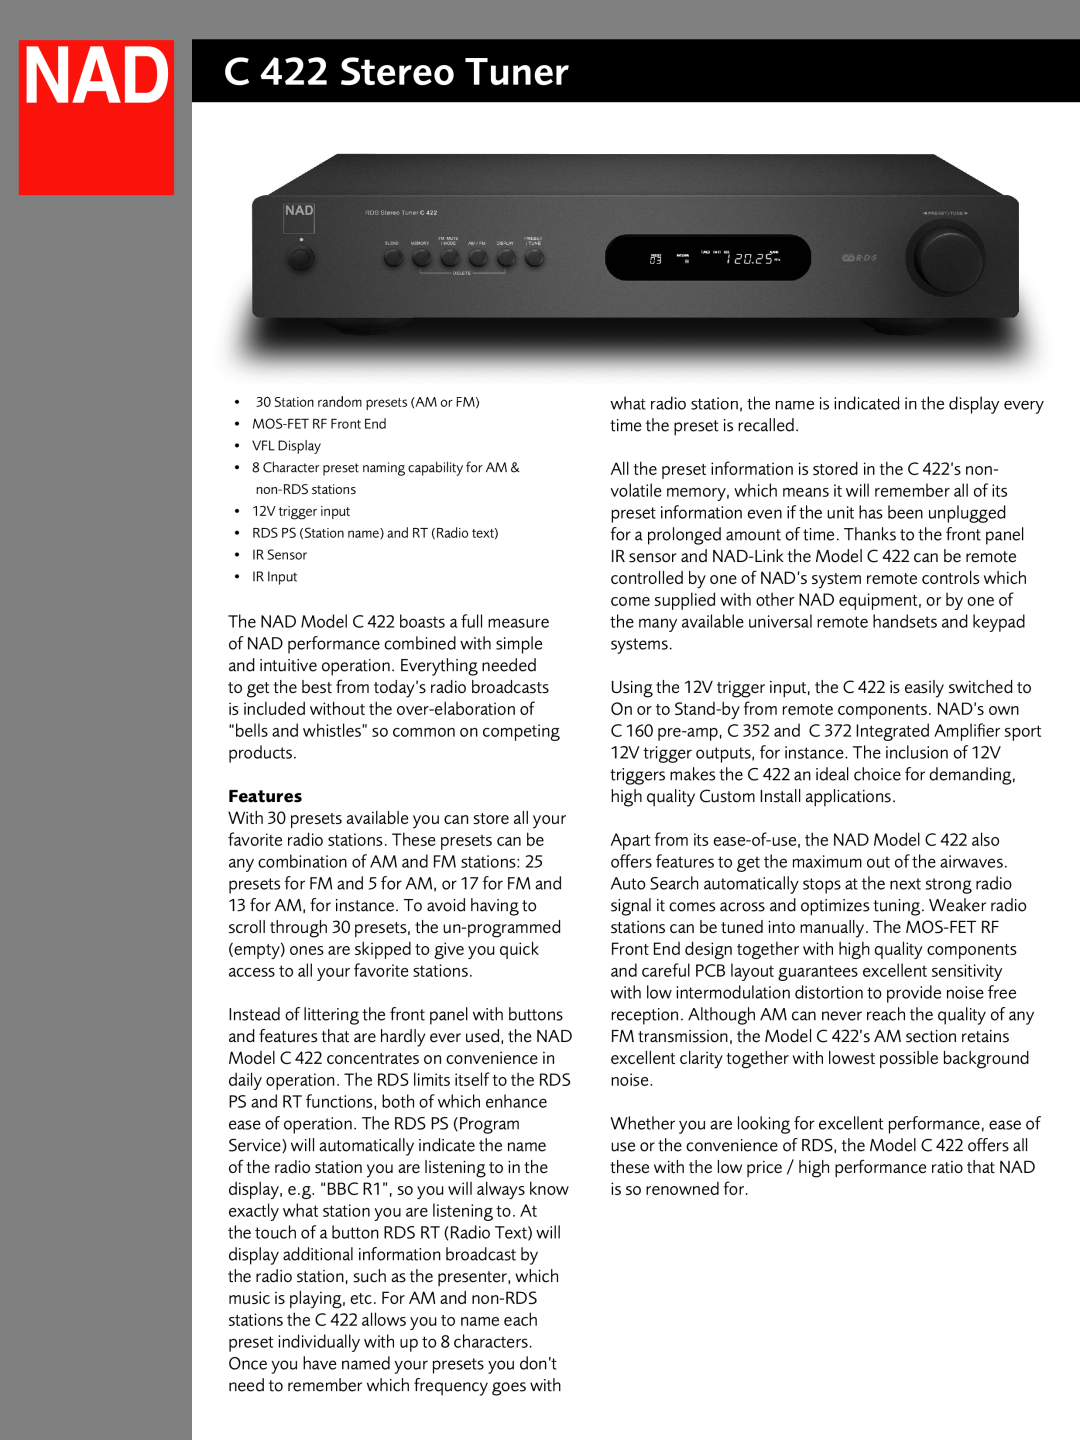 NAD C422 manual C 422 Stereo Tuner, Features, time the preset is recalled 